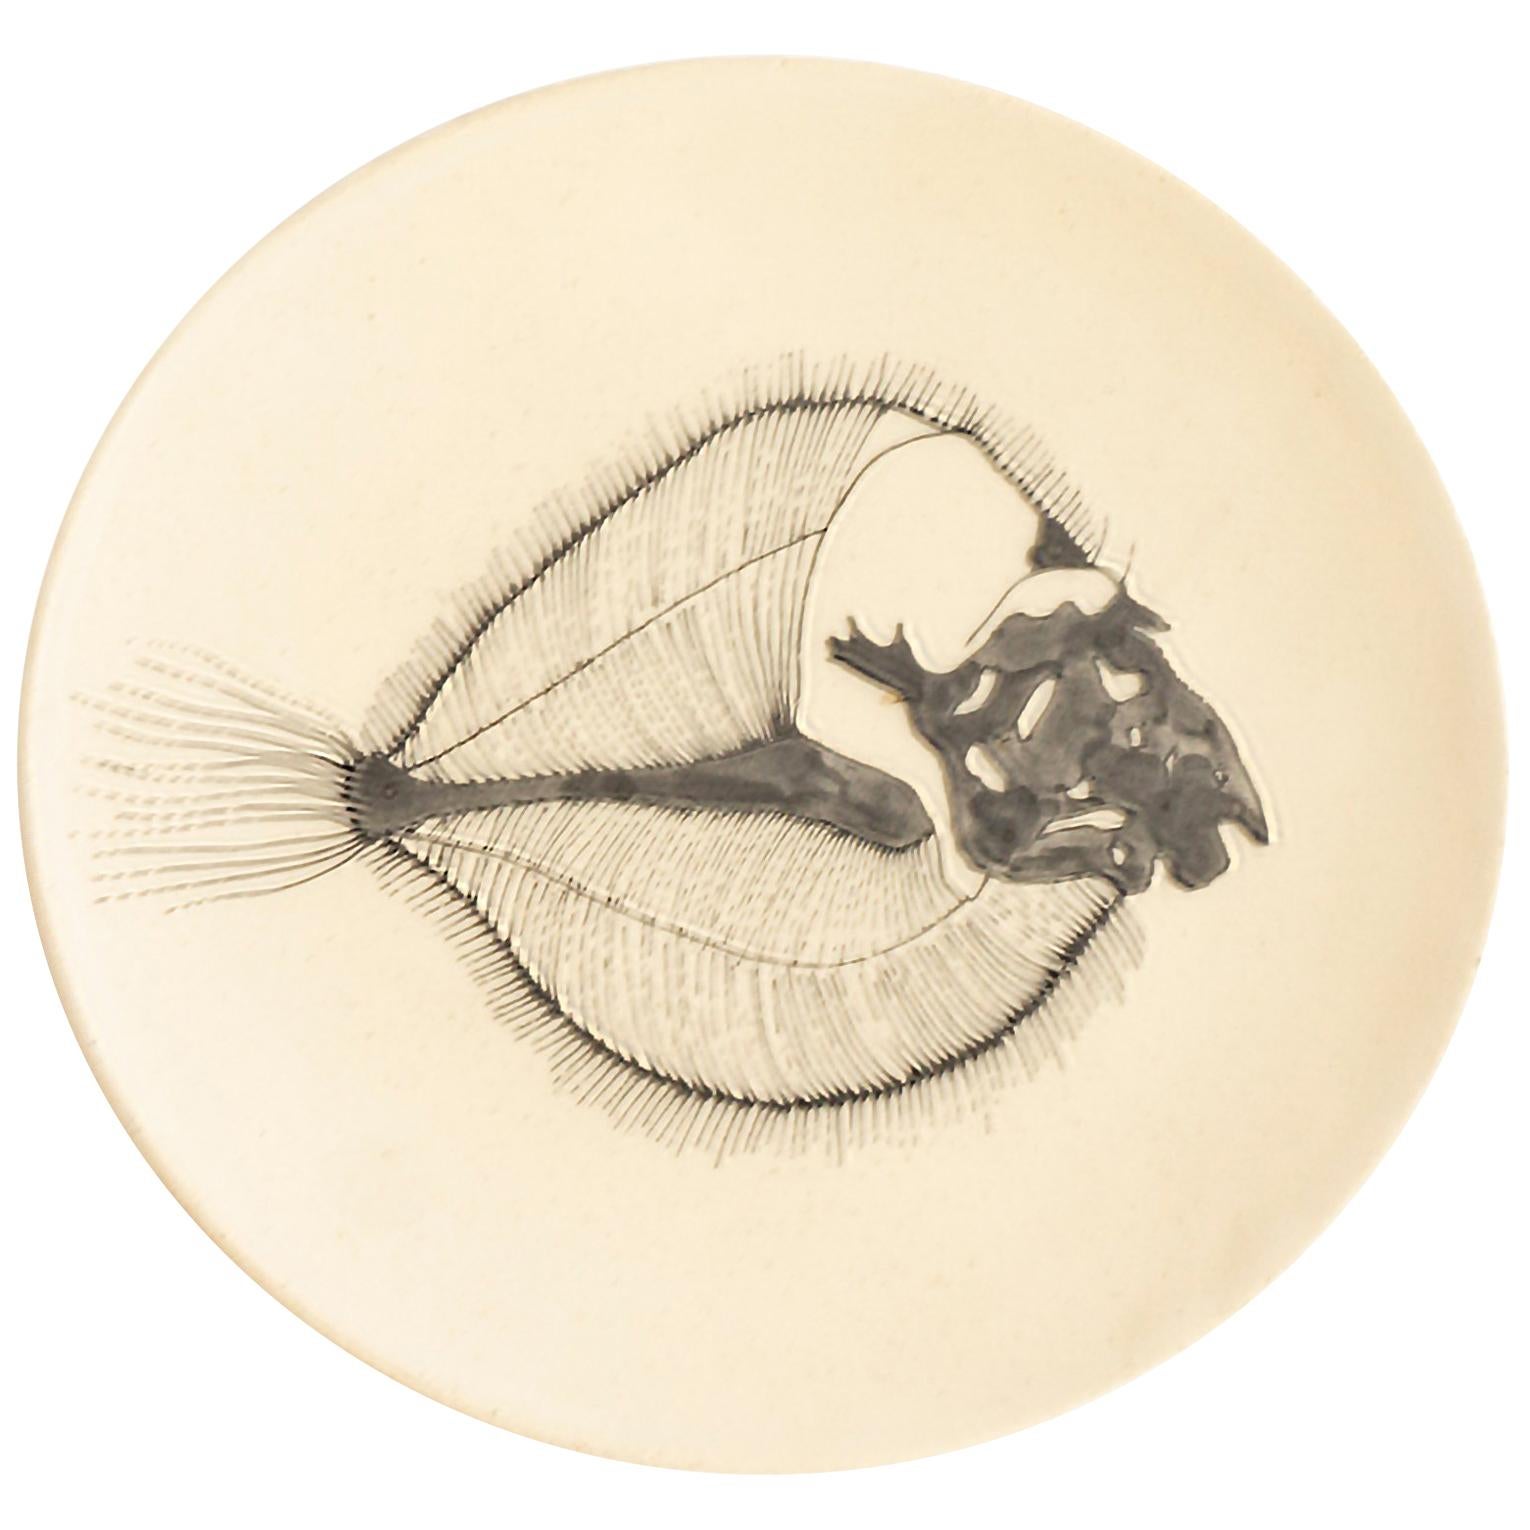 Small Handmade Ceramic Plates with Fish Fossil Illustration For Sale